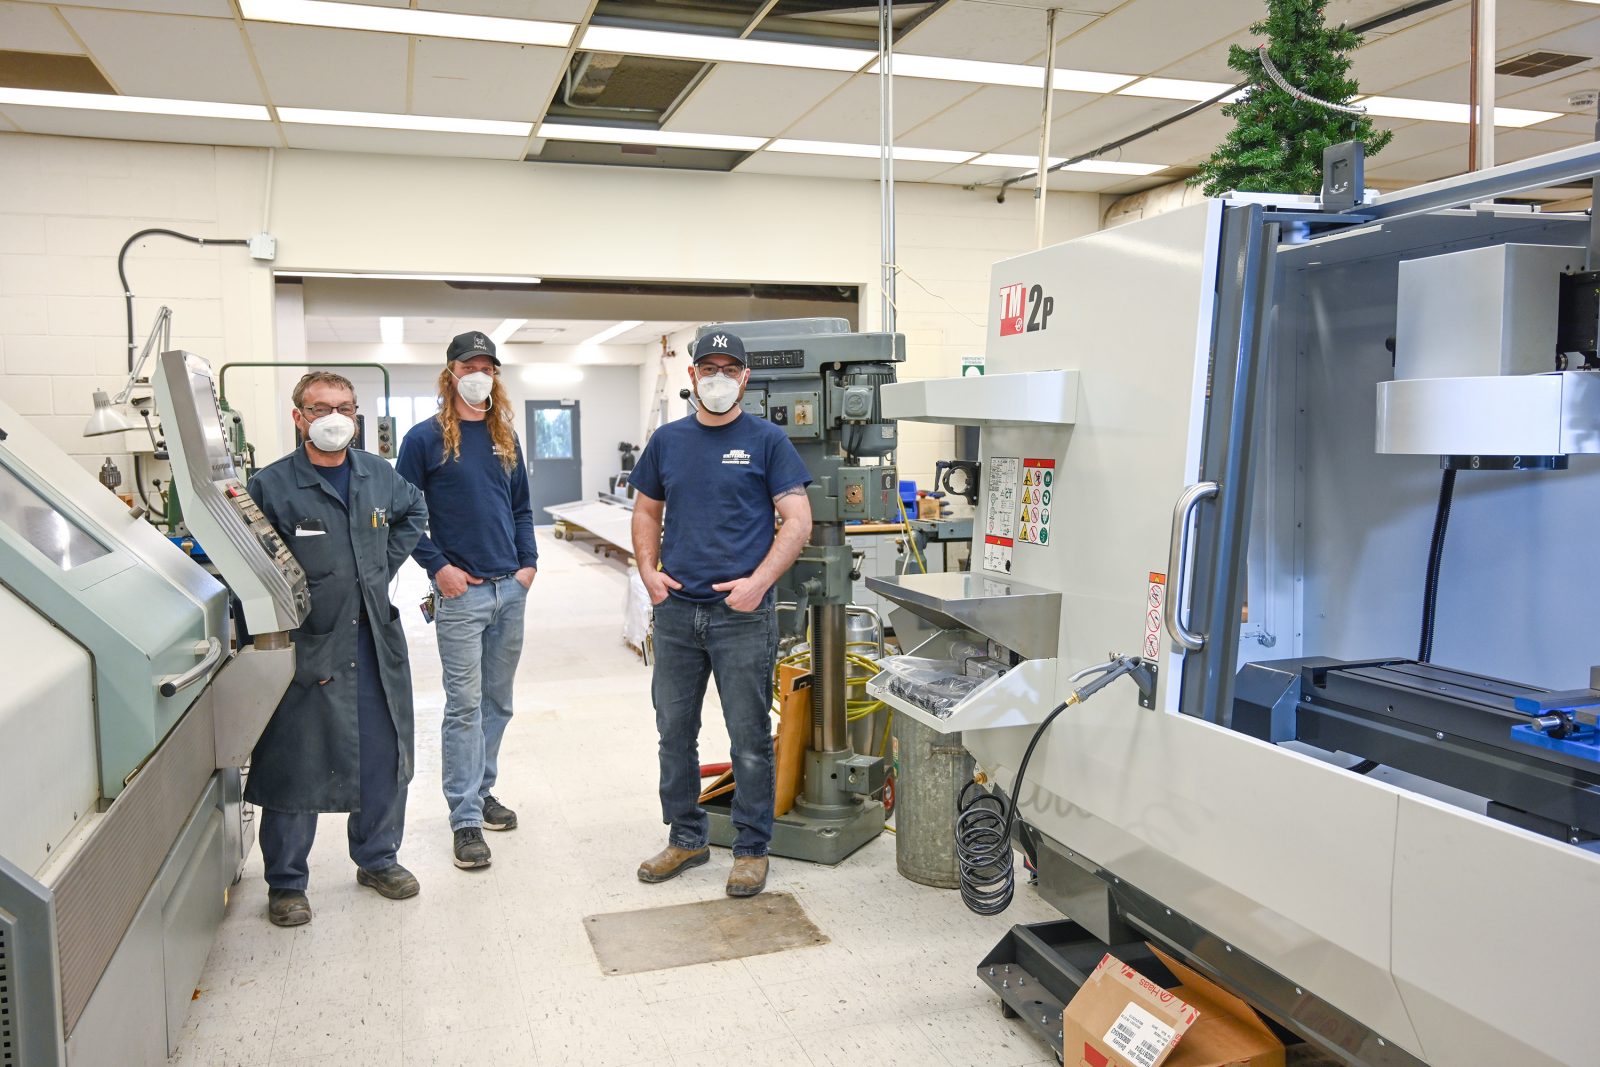 Three staff members stand among shop tools and machines in Brock University’s Machine Shop.